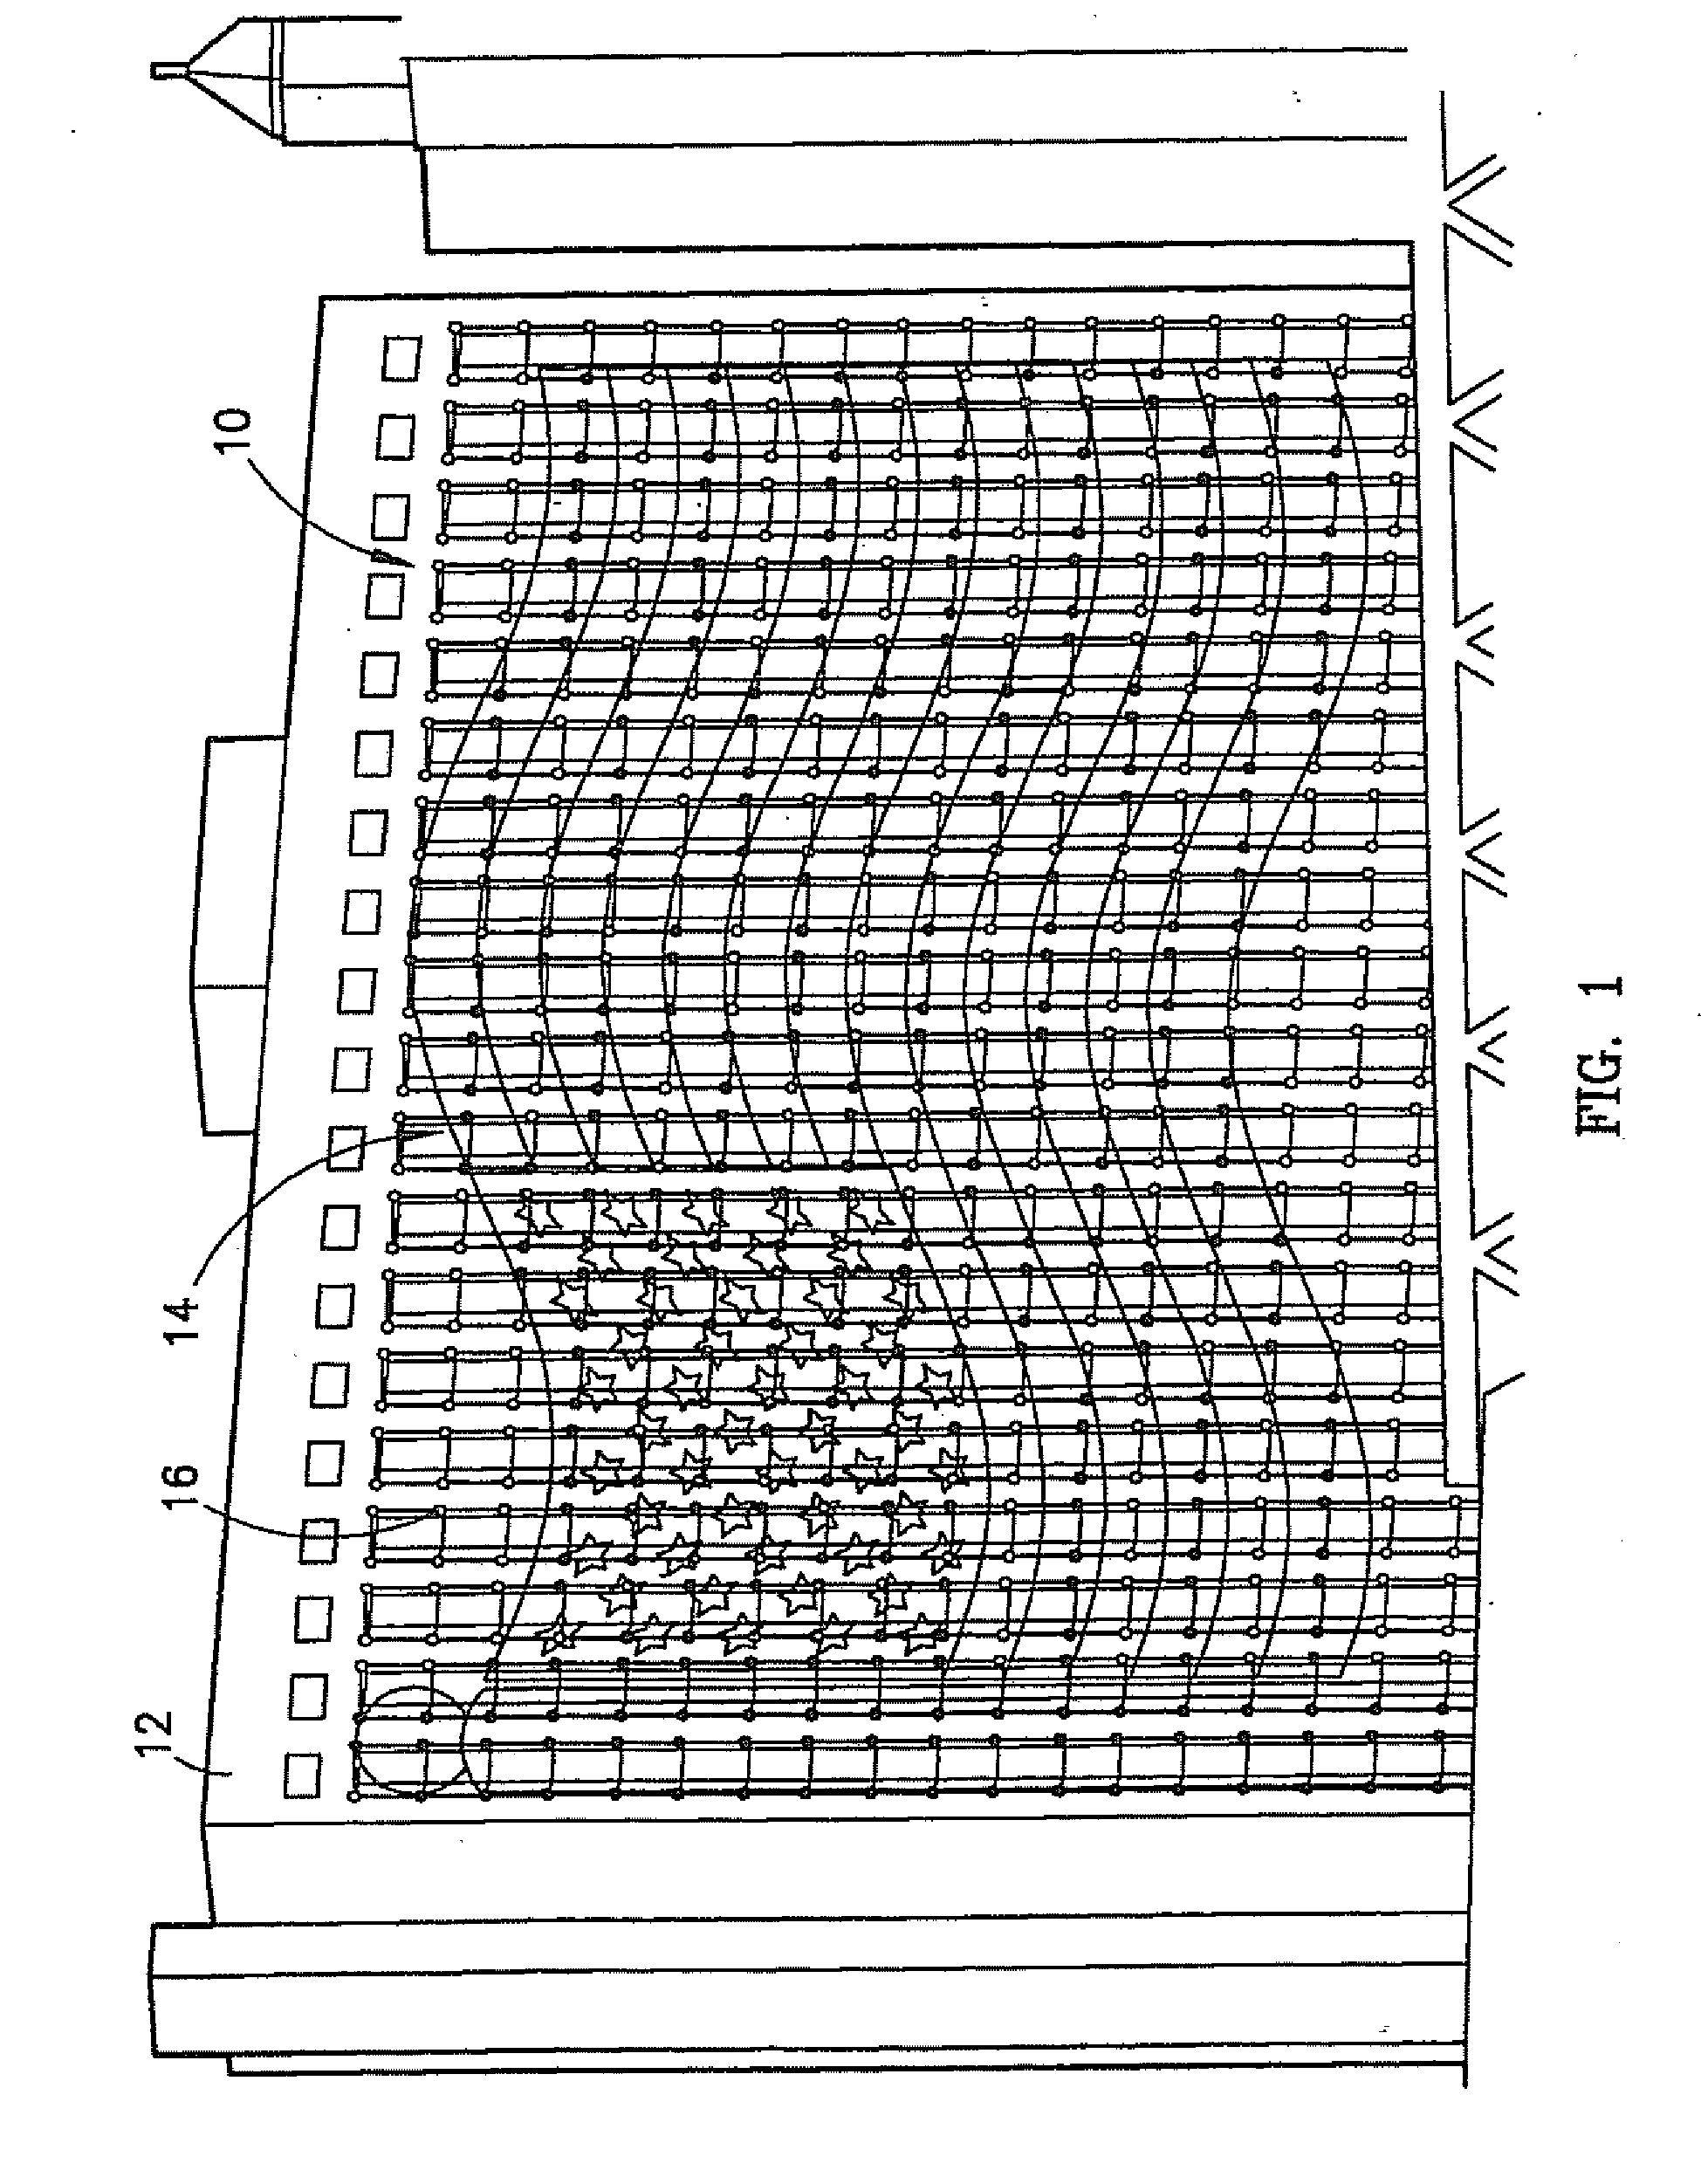 Expanded bit map display for mounting on a building surface and a method of creating same